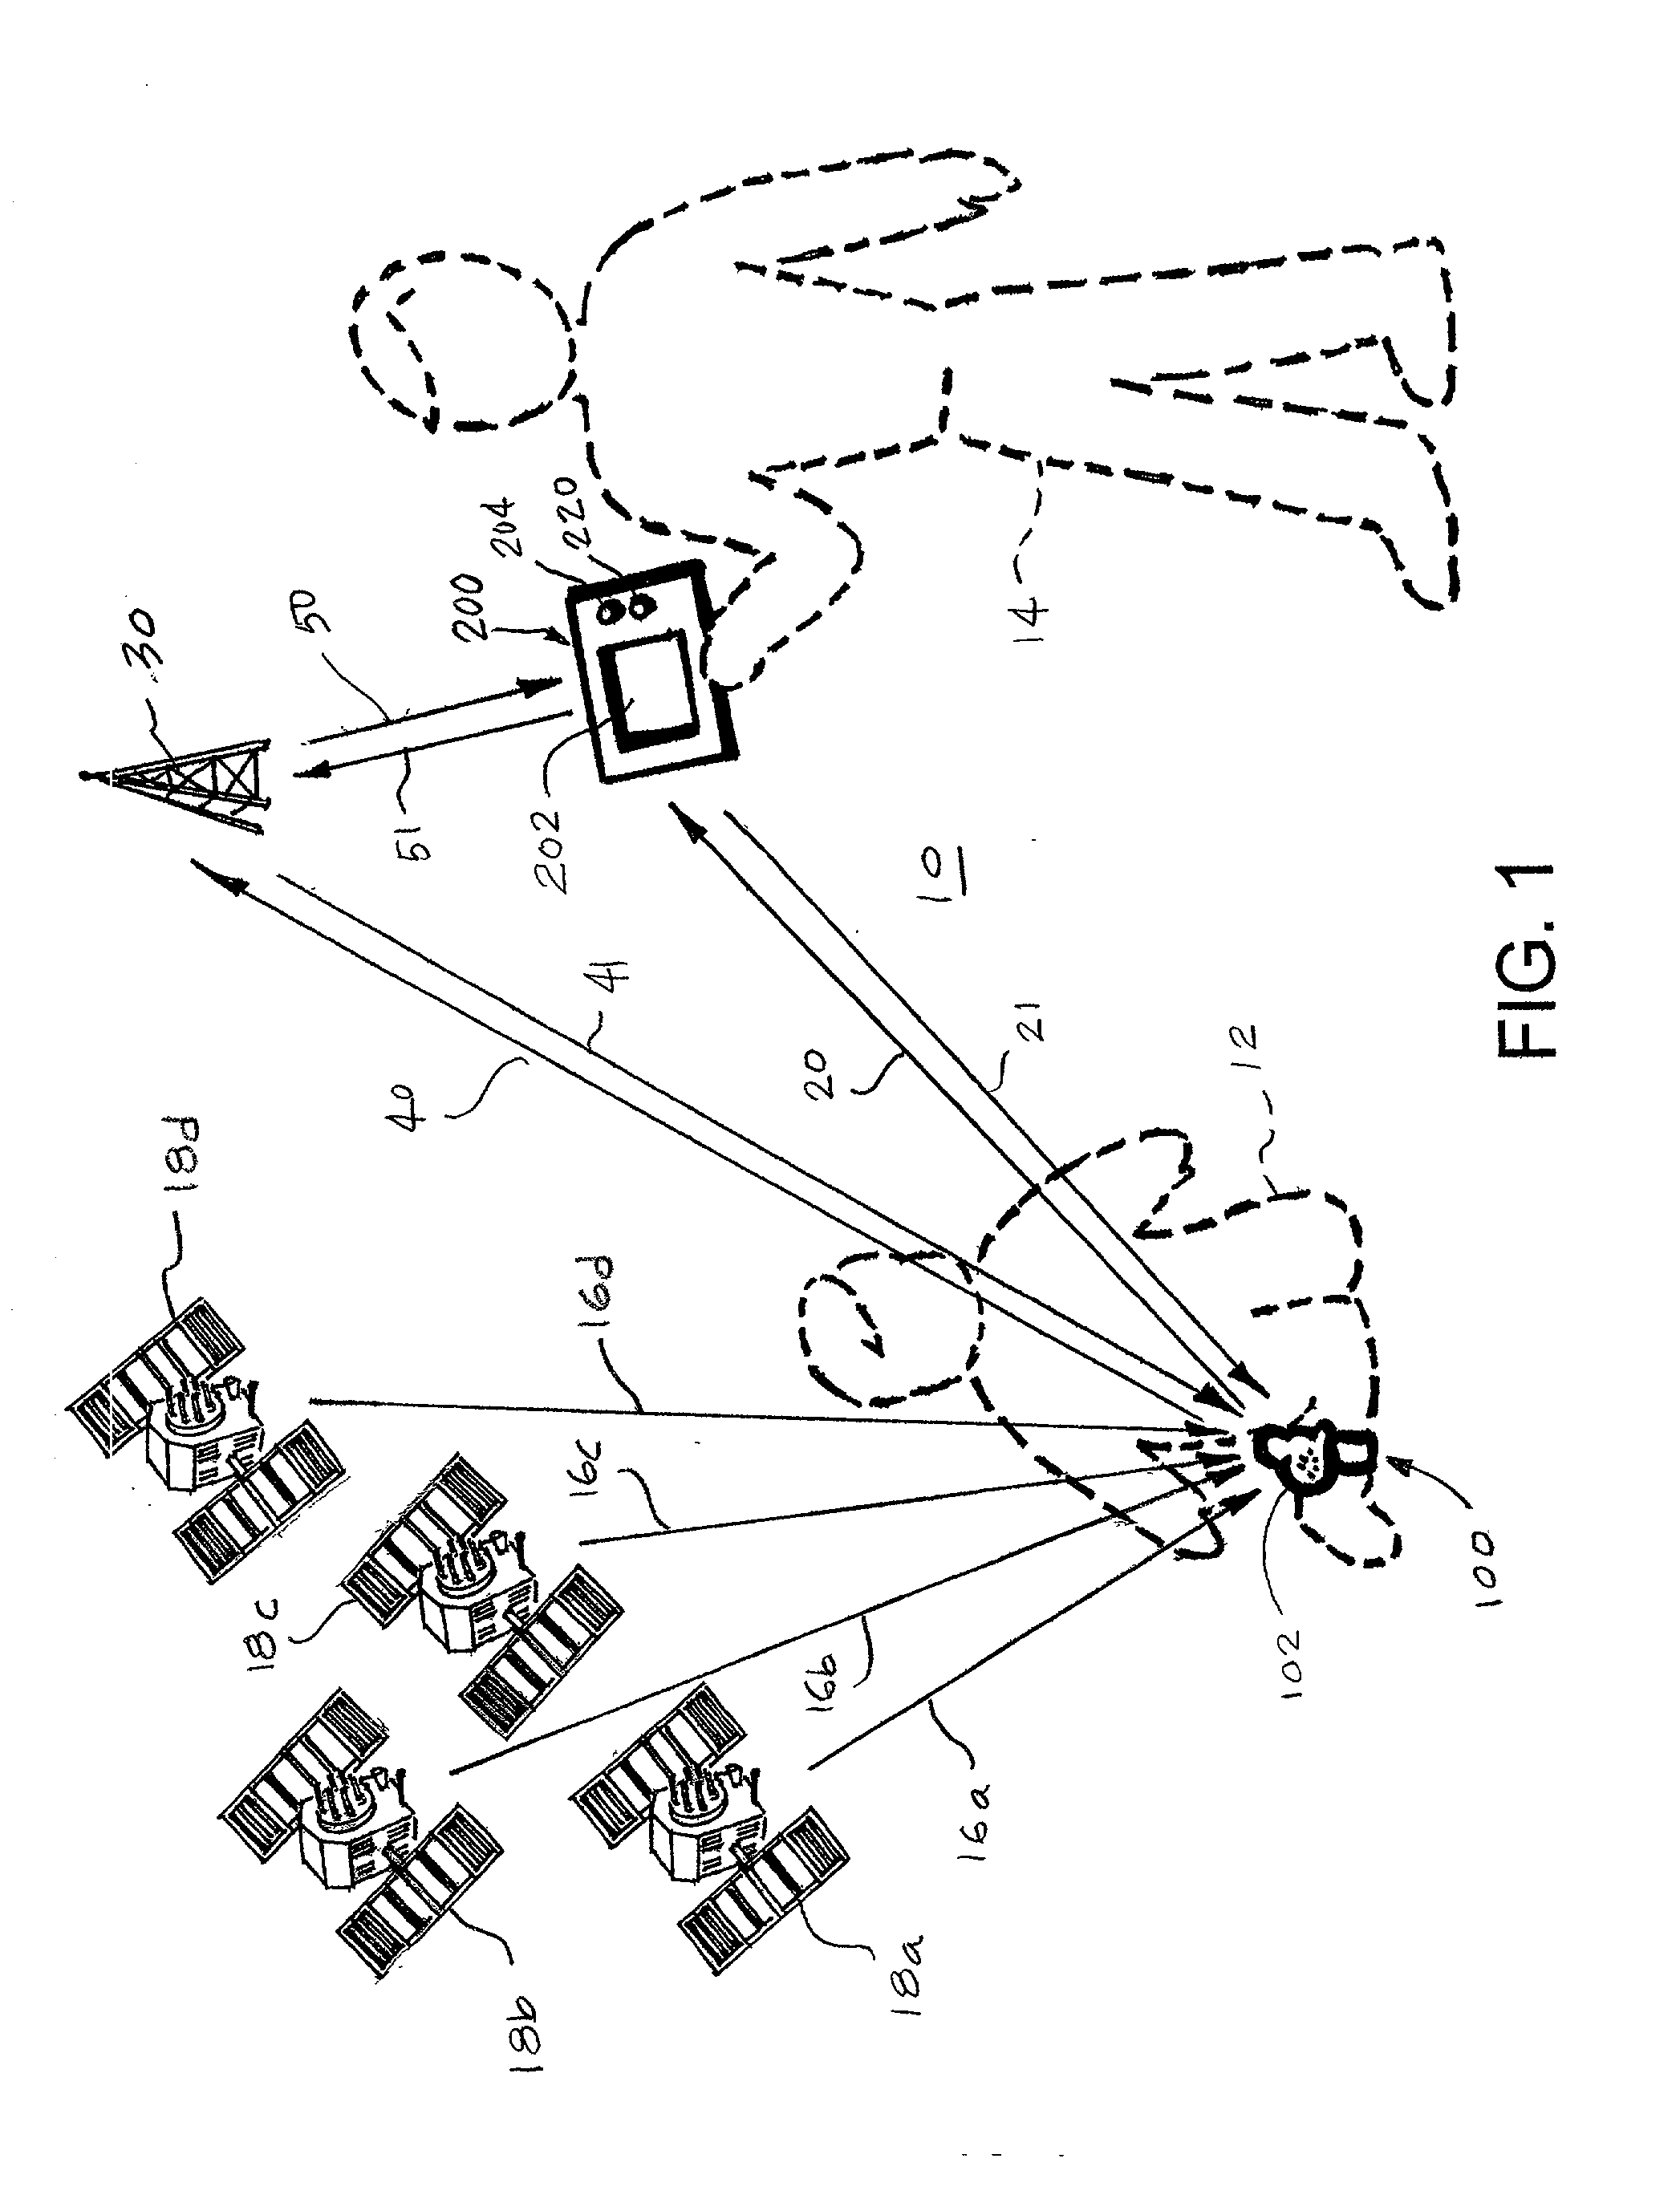 Method and apparatus for locating missing persons